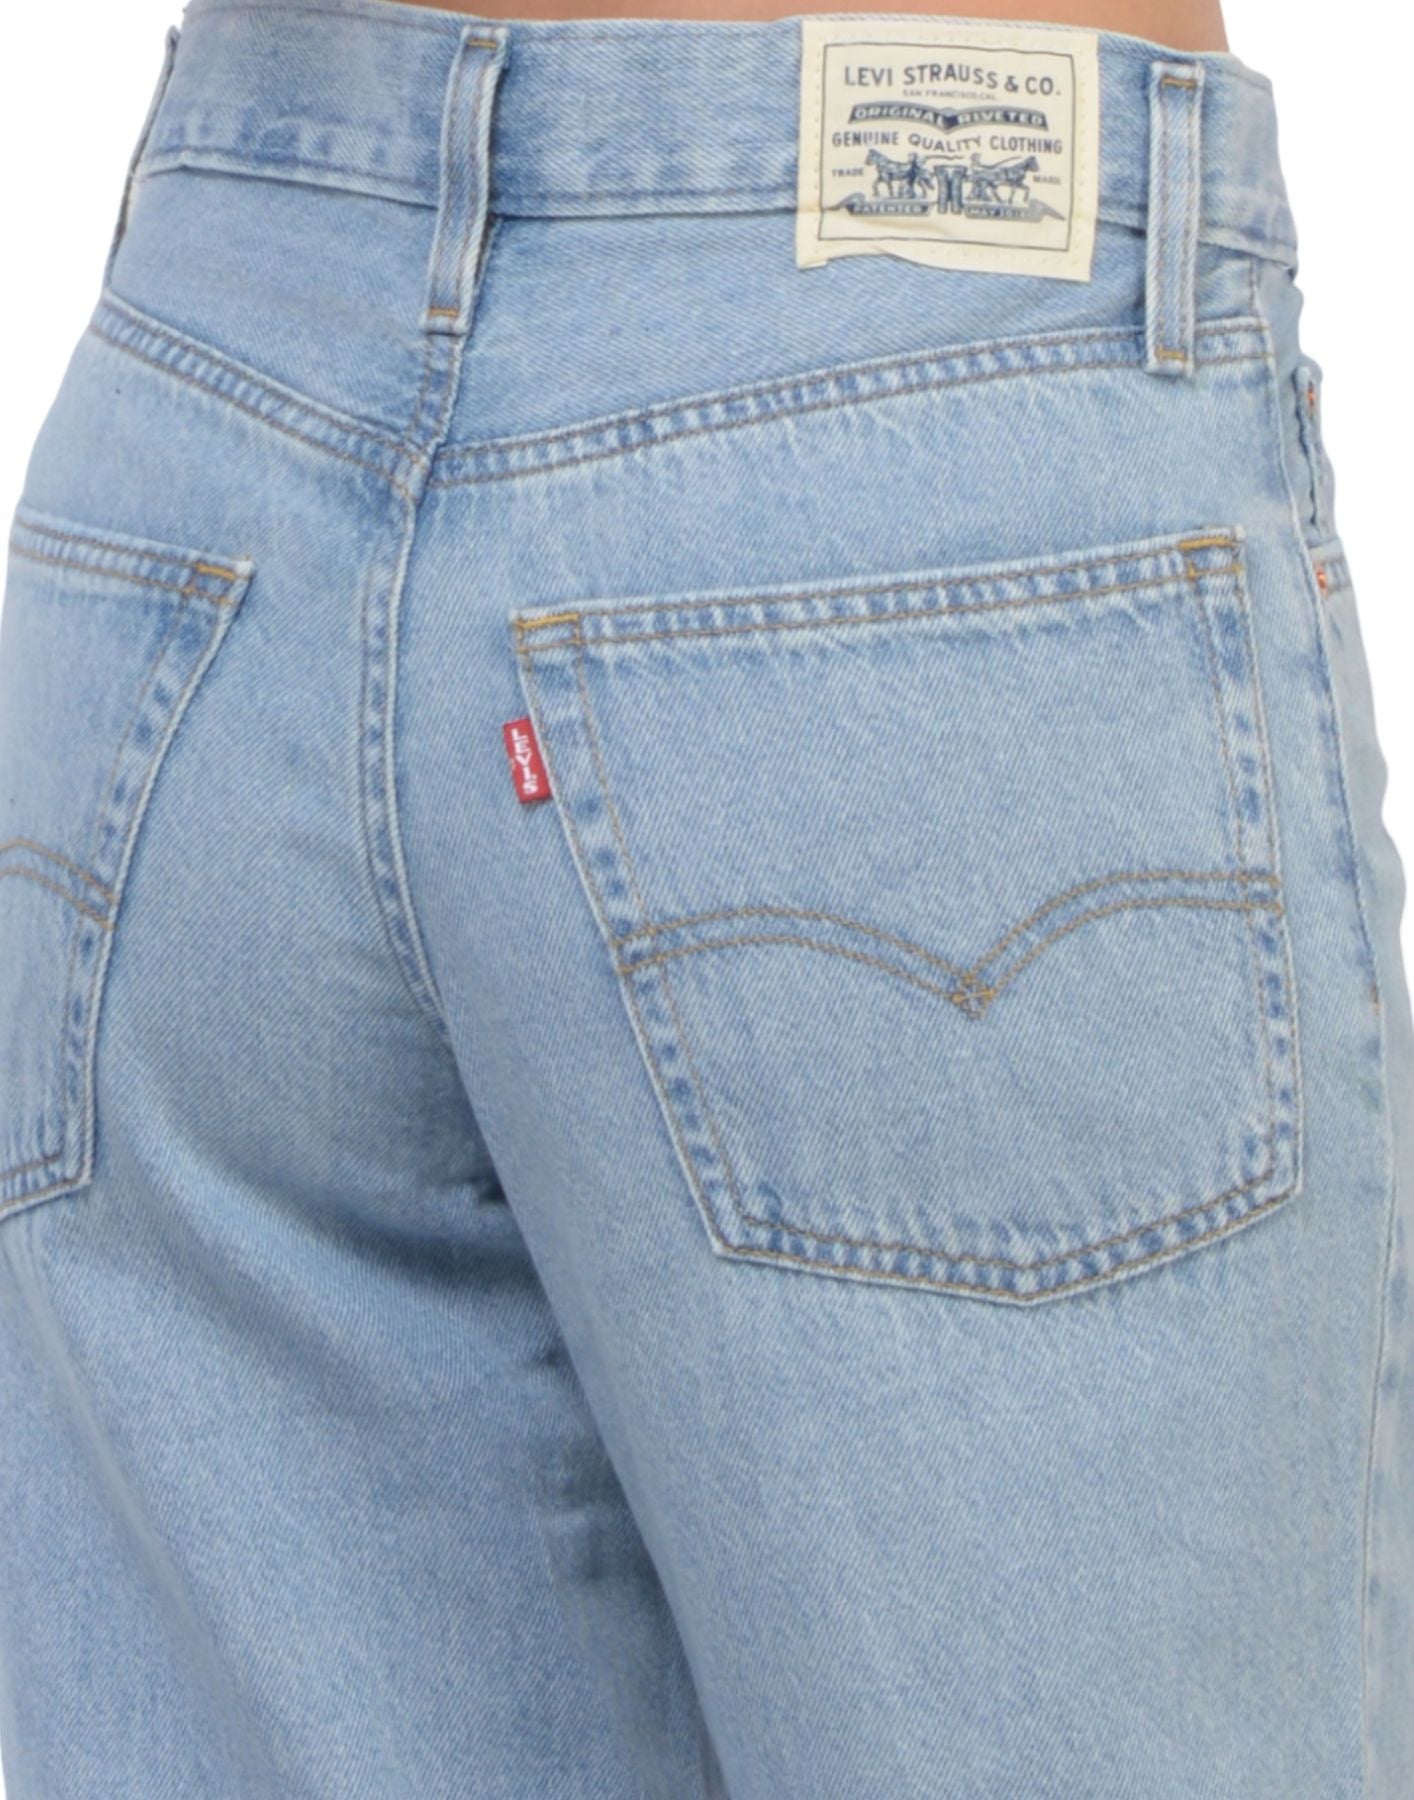 Jeans for woman A34940033 Levi's